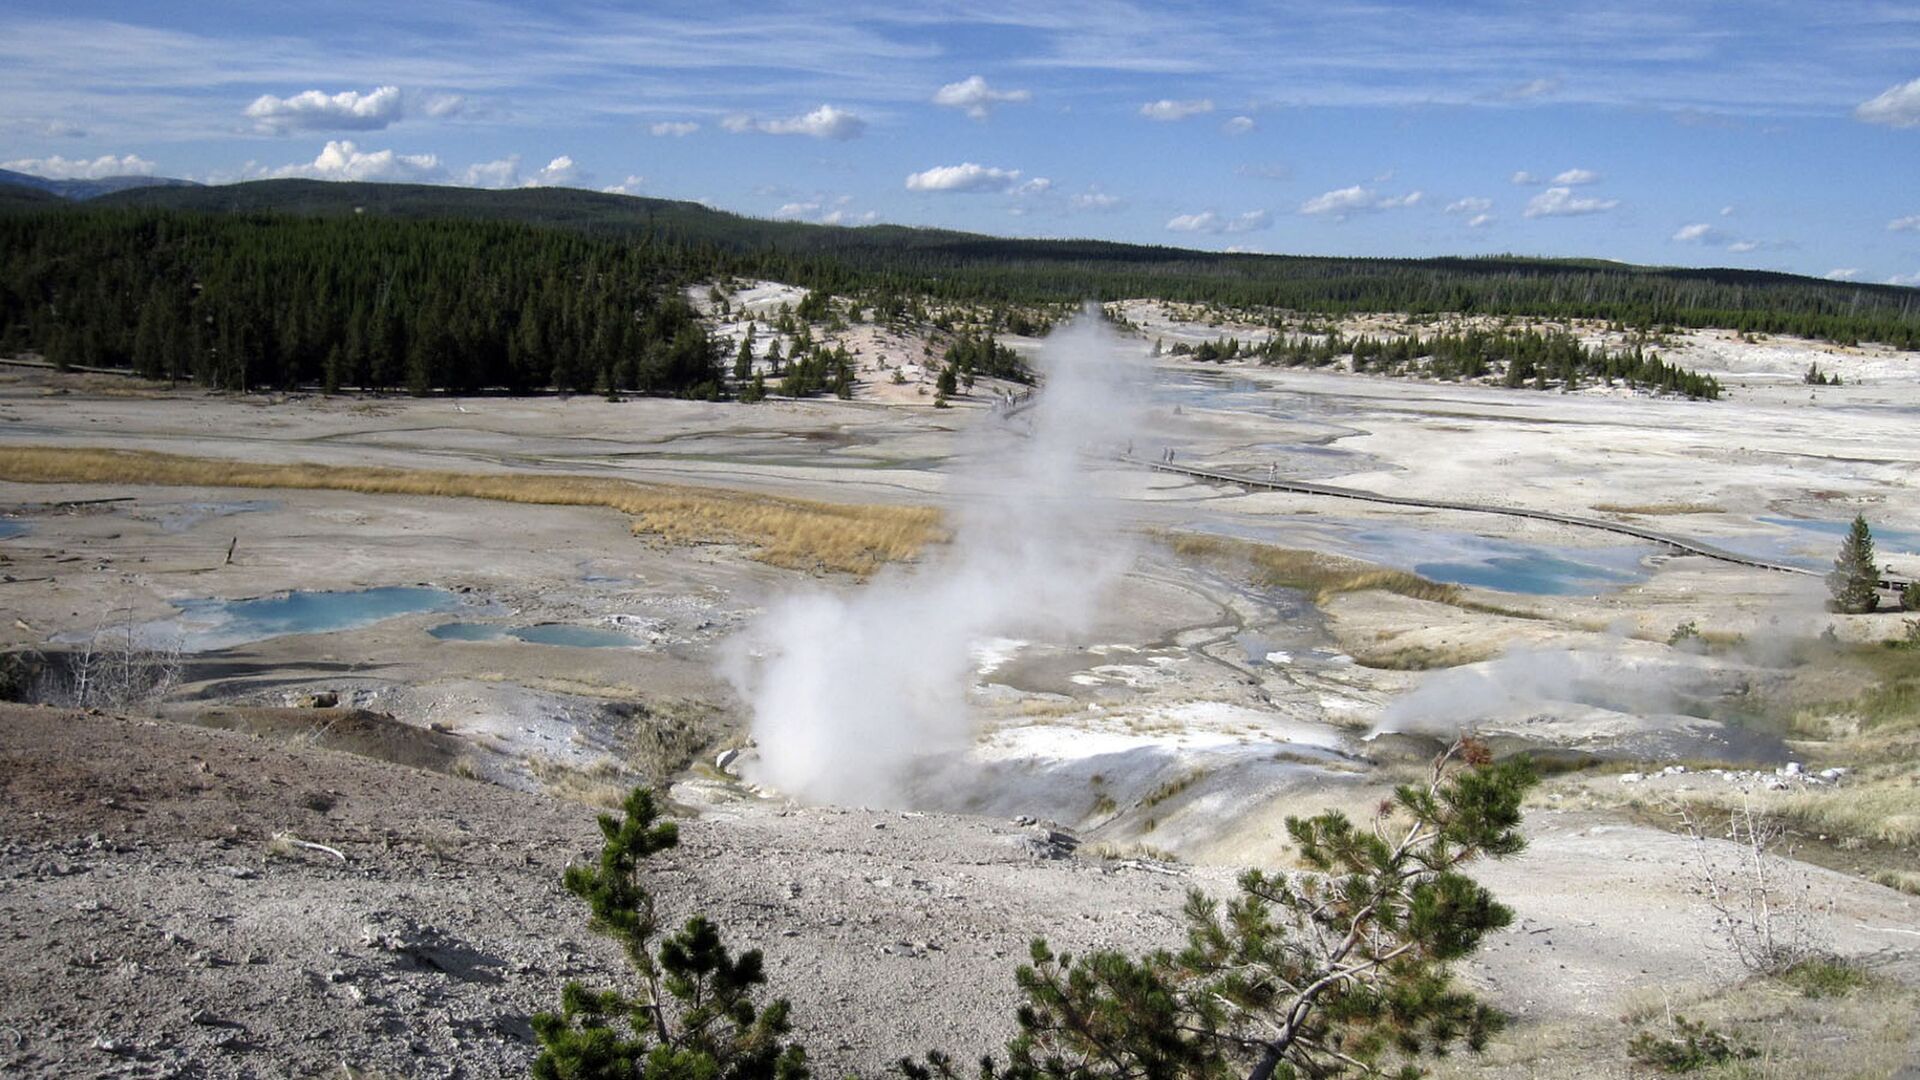 This September, 2009 file photo shows the Norris Geyser Basin in Yellowstone National Park, Wyo. Rangers are navigating a dangerous landscape where boiling water flows beneath a fragile rock crust as they search for a man who reportedly fell into a hot spring at Yellowstone National Park. Officials say the safety of park personnel was a top concern during the search in the popular Norris Geyser Basin. The man is presumed dead.  - Sputnik International, 1920, 15.06.2022